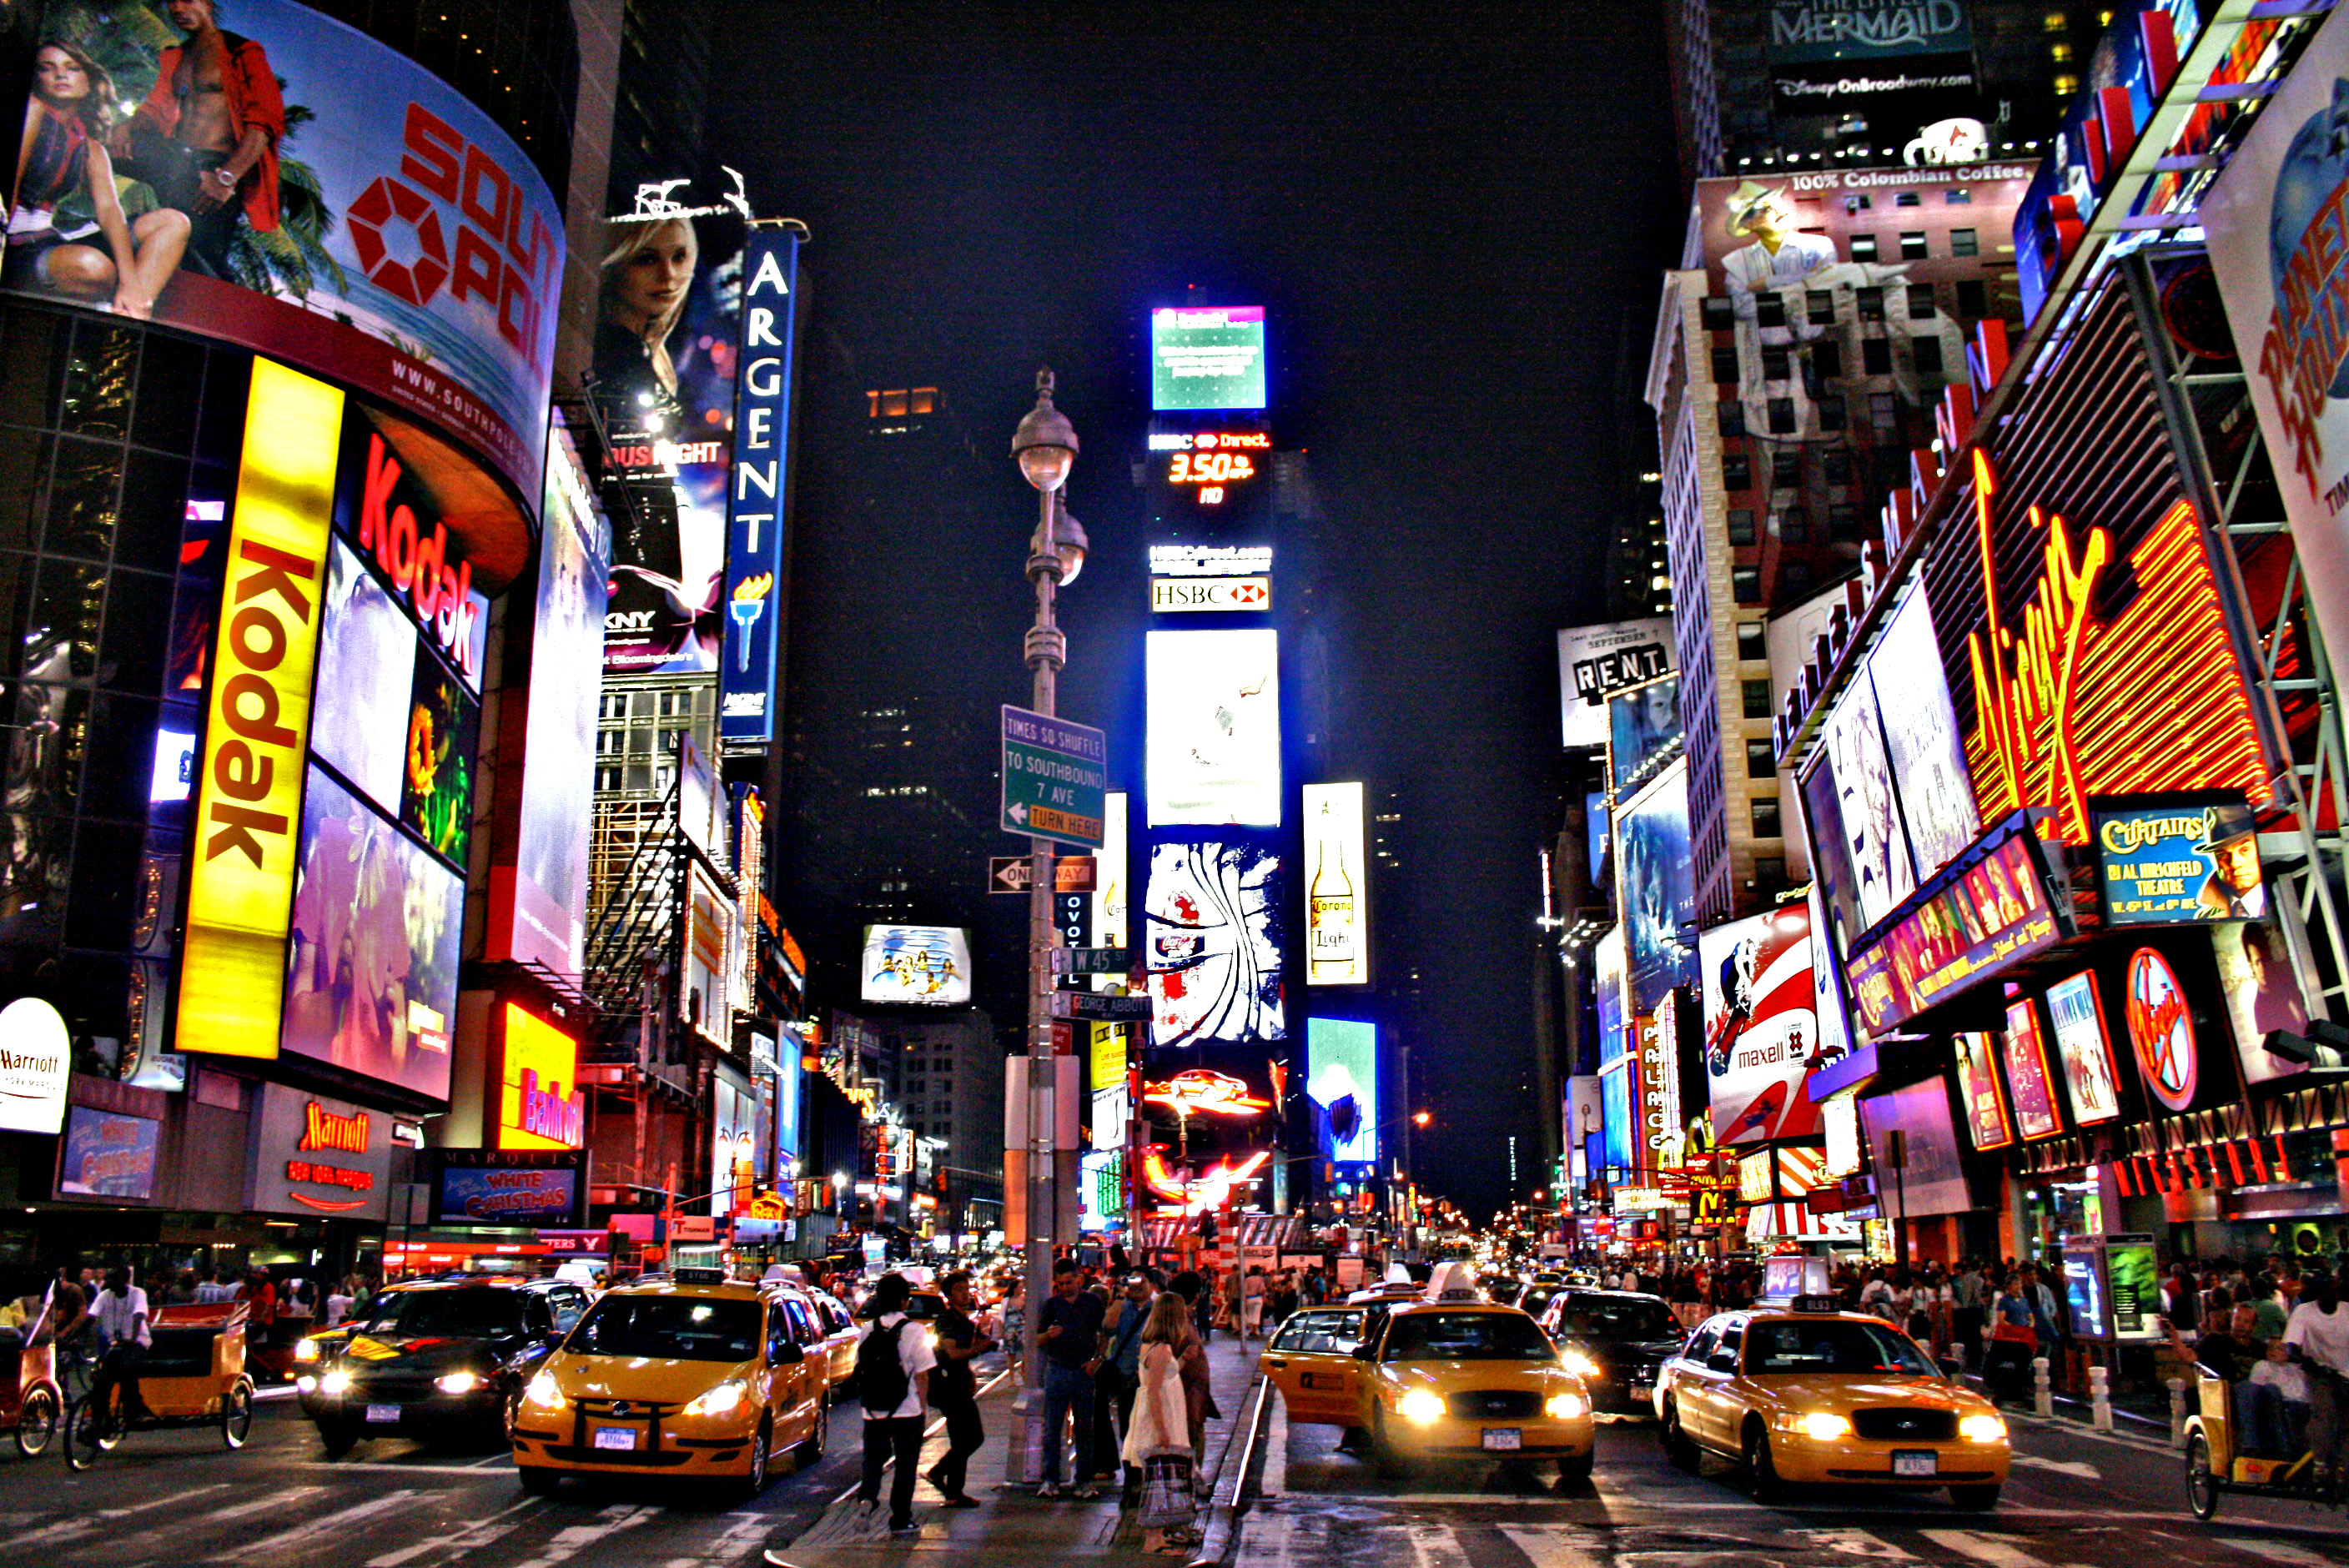 Times Square New York at night